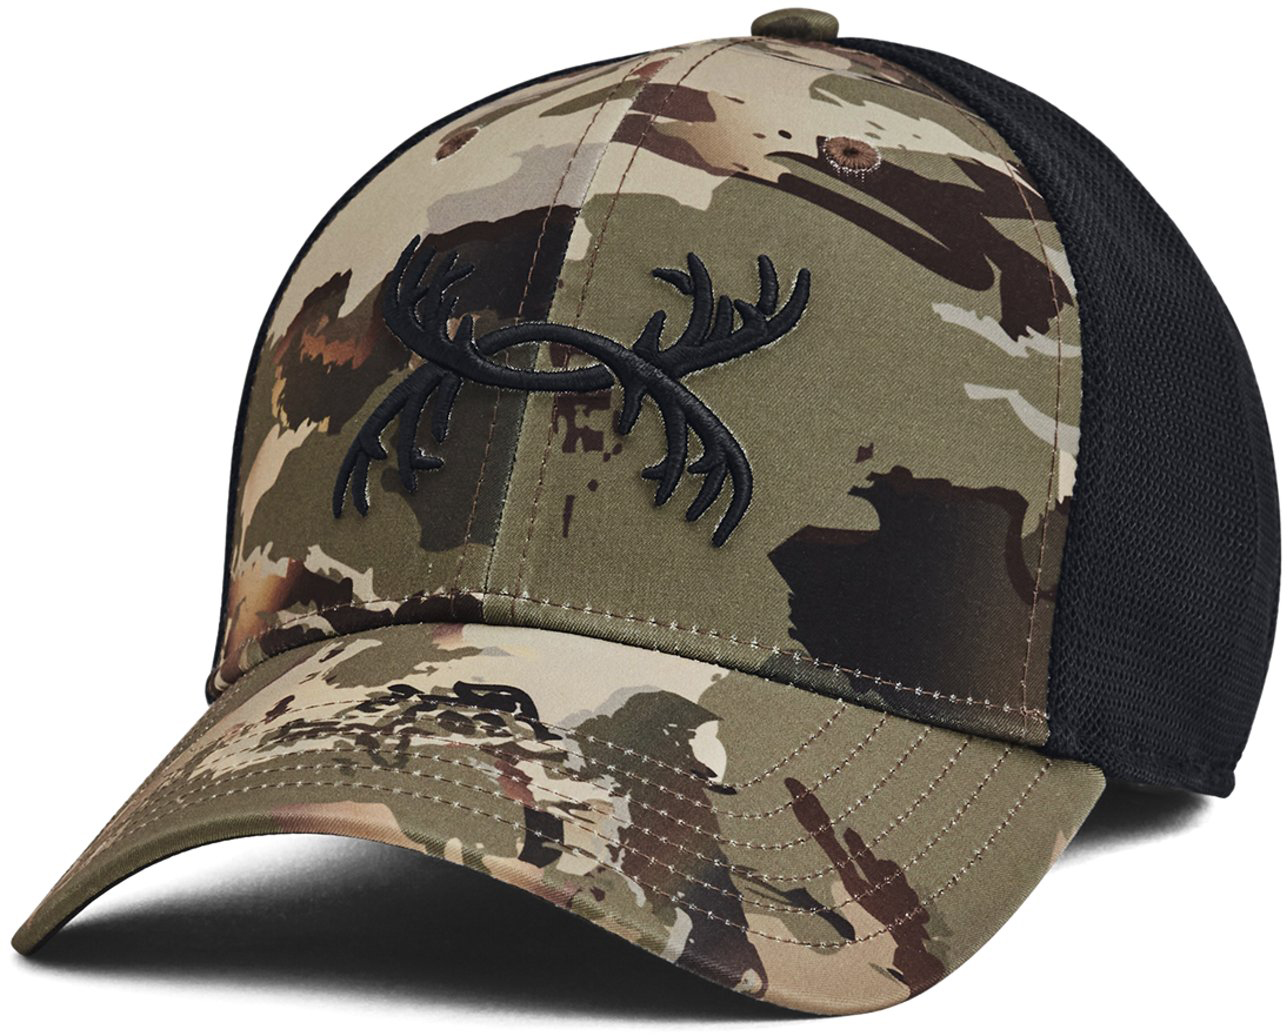 Under Armour American Hats for Men